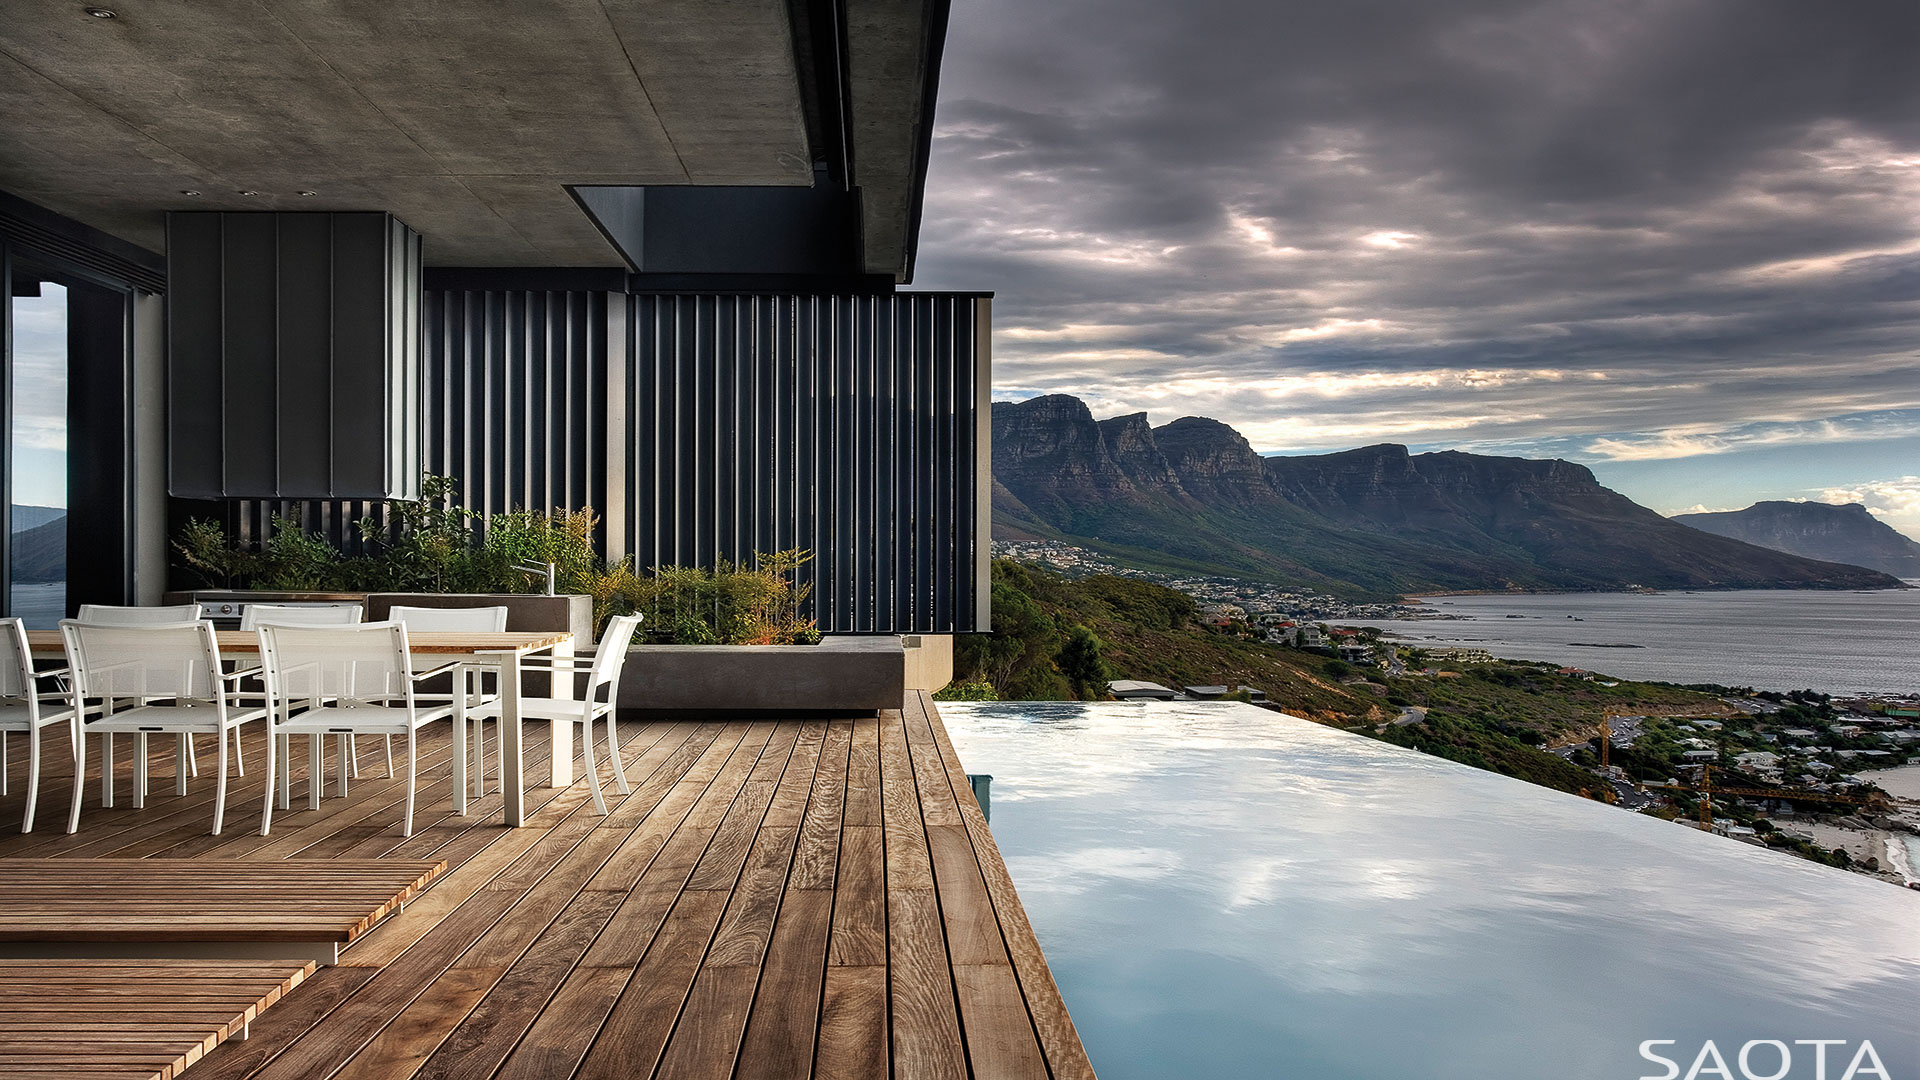 Across the Atlantic and almost as south as you can go on the African continent, SAOTA provide this coastal backyard that opens up to the mountains and sky and sea in equal measure. #coastalbackyard inspiration via www.L-2-Design.com